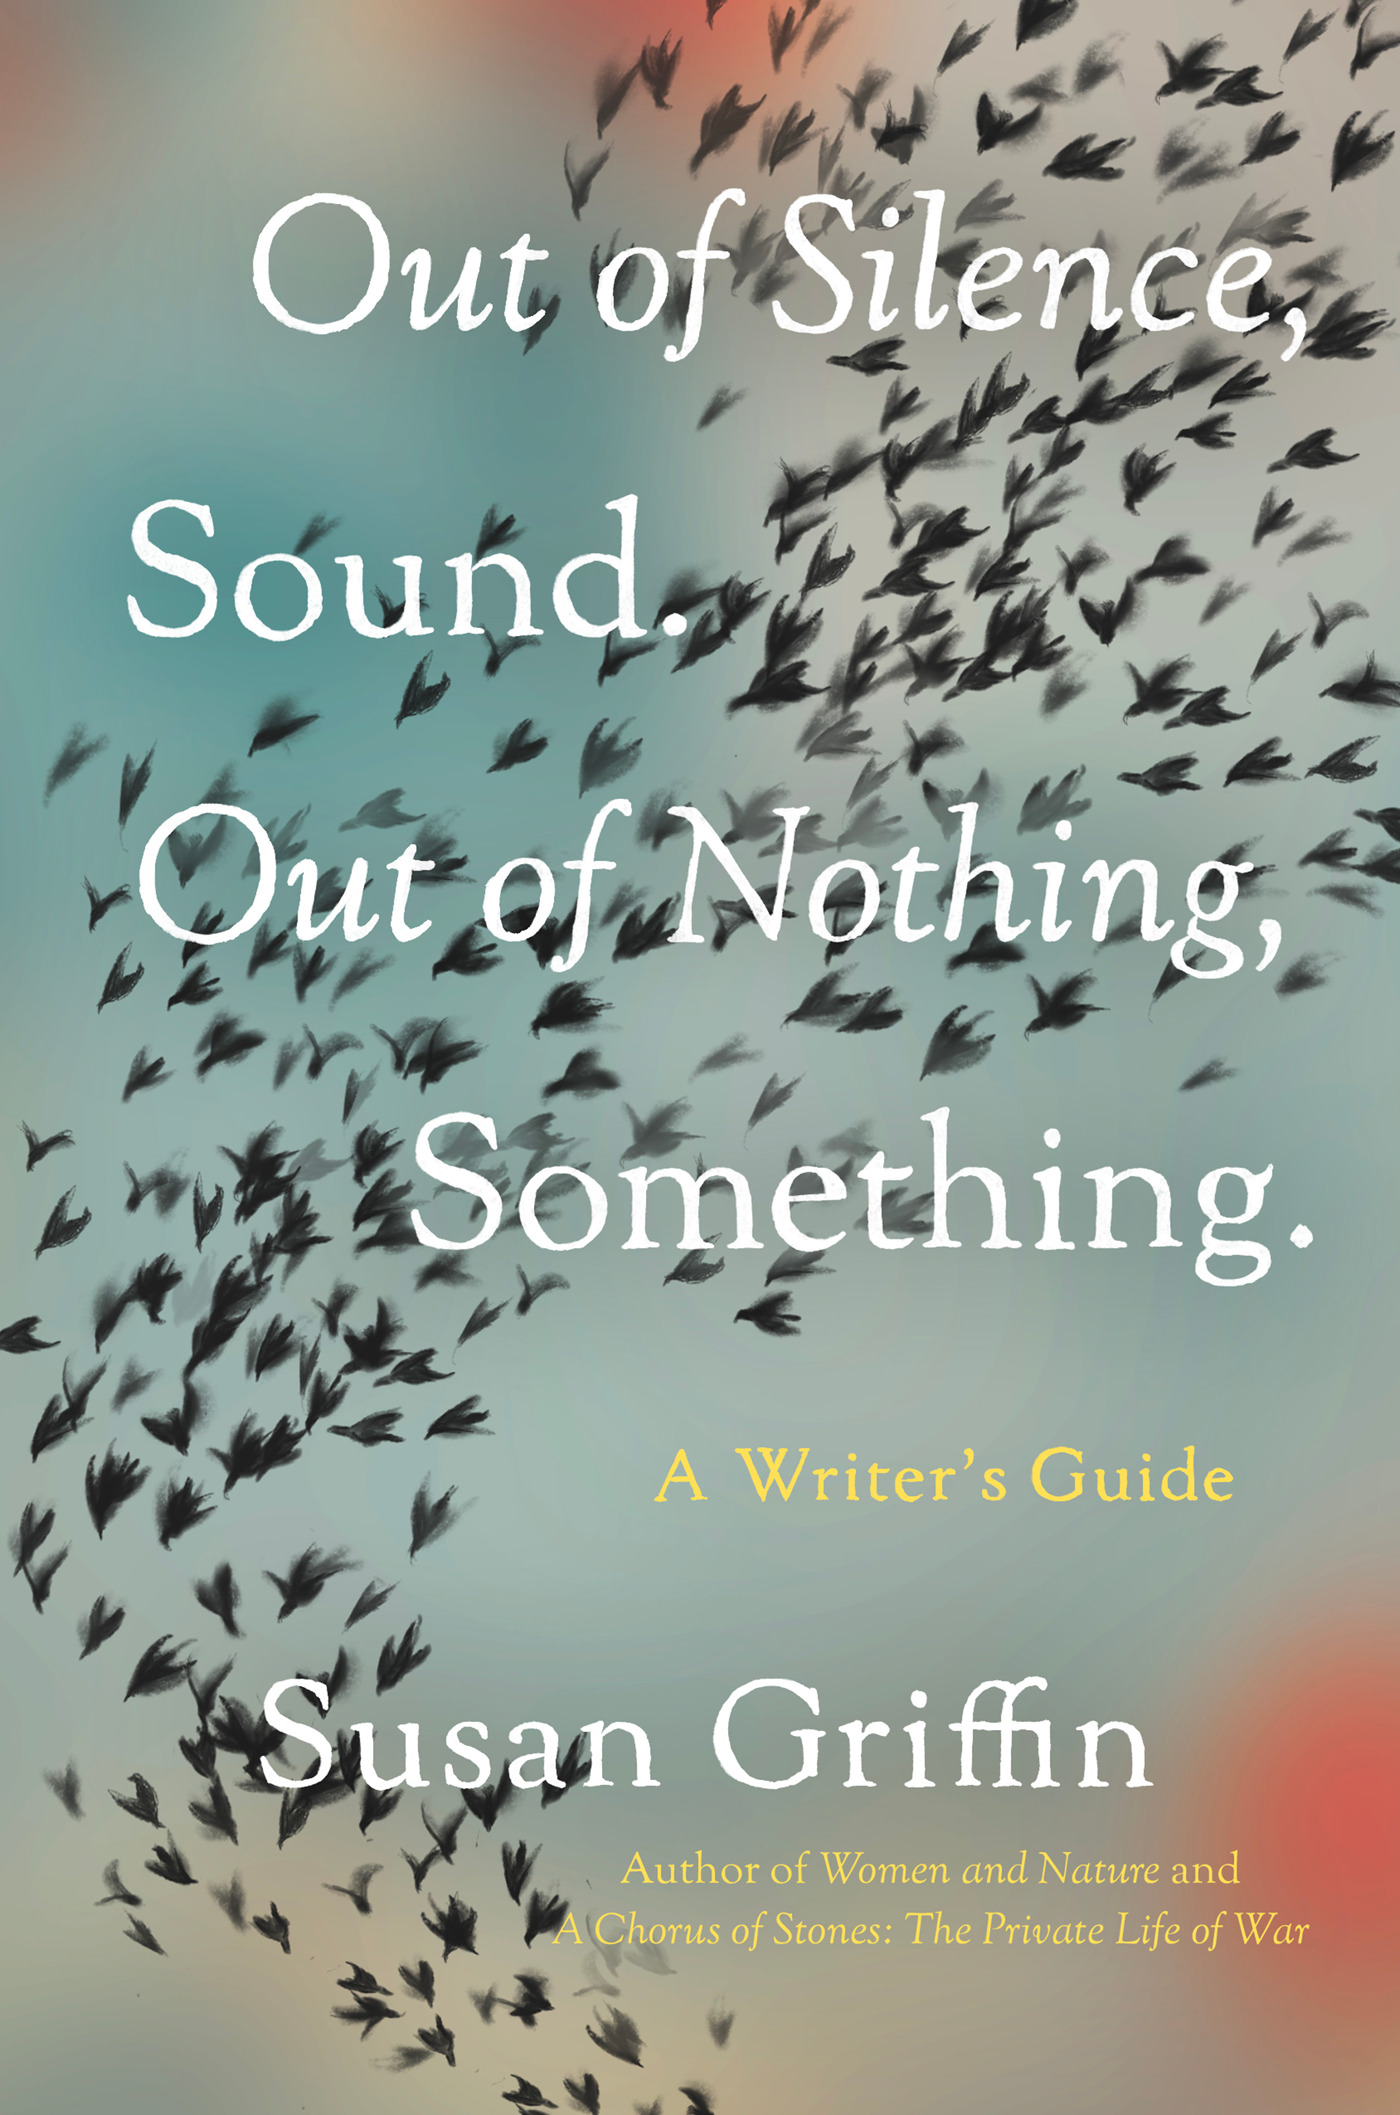 Susan Griffin: Out of Silence, Sound. Out of Nothing, Something (2023, Counterpoint Press)